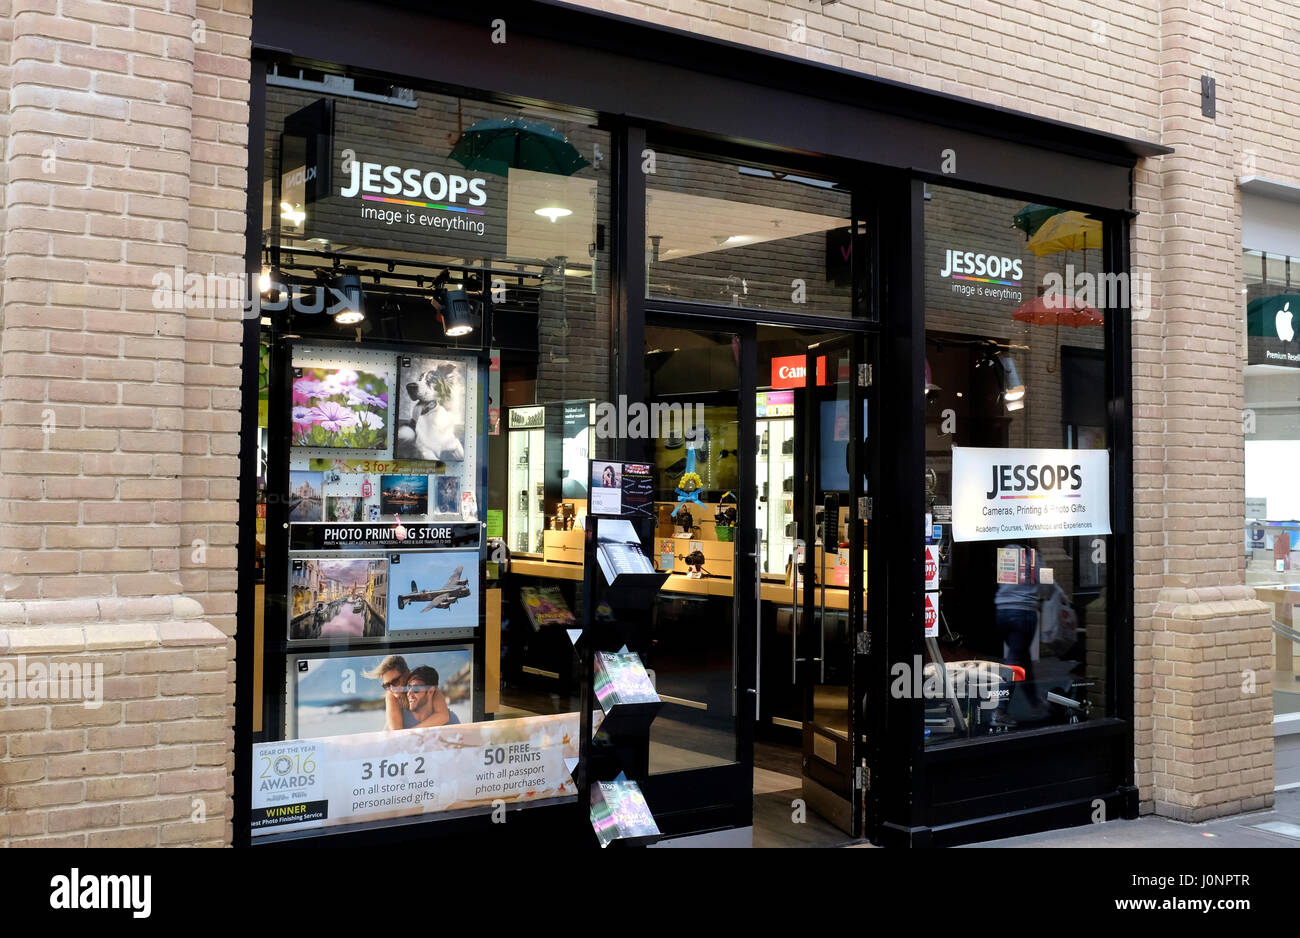 jessops photographic retailer in the city of canterbury east kent uk april 2017 Stock Photo